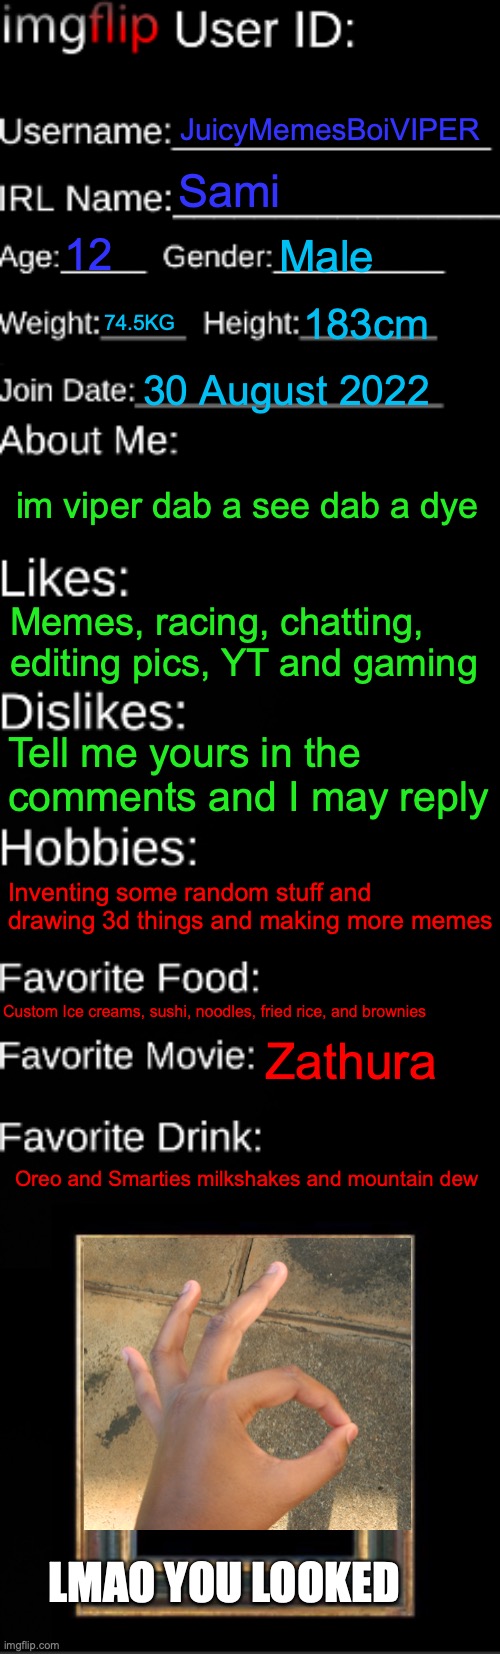 Okay guys here so i made one |  JuicyMemesBoiVIPER; Sami; 12; Male; 74.5KG; 183cm; 30 August 2022; im viper dab a see dab a dye; Memes, racing, chatting, editing pics, YT and gaming; Tell me yours in the comments and I may reply; Inventing some random stuff and drawing 3d things and making more memes; Custom Ice creams, sushi, noodles, fried rice, and brownies; Zathura; Oreo and Smarties milkshakes and mountain dew; LMAO YOU LOOKED | image tagged in imgflip id card,yes,sami,memes,true | made w/ Imgflip meme maker